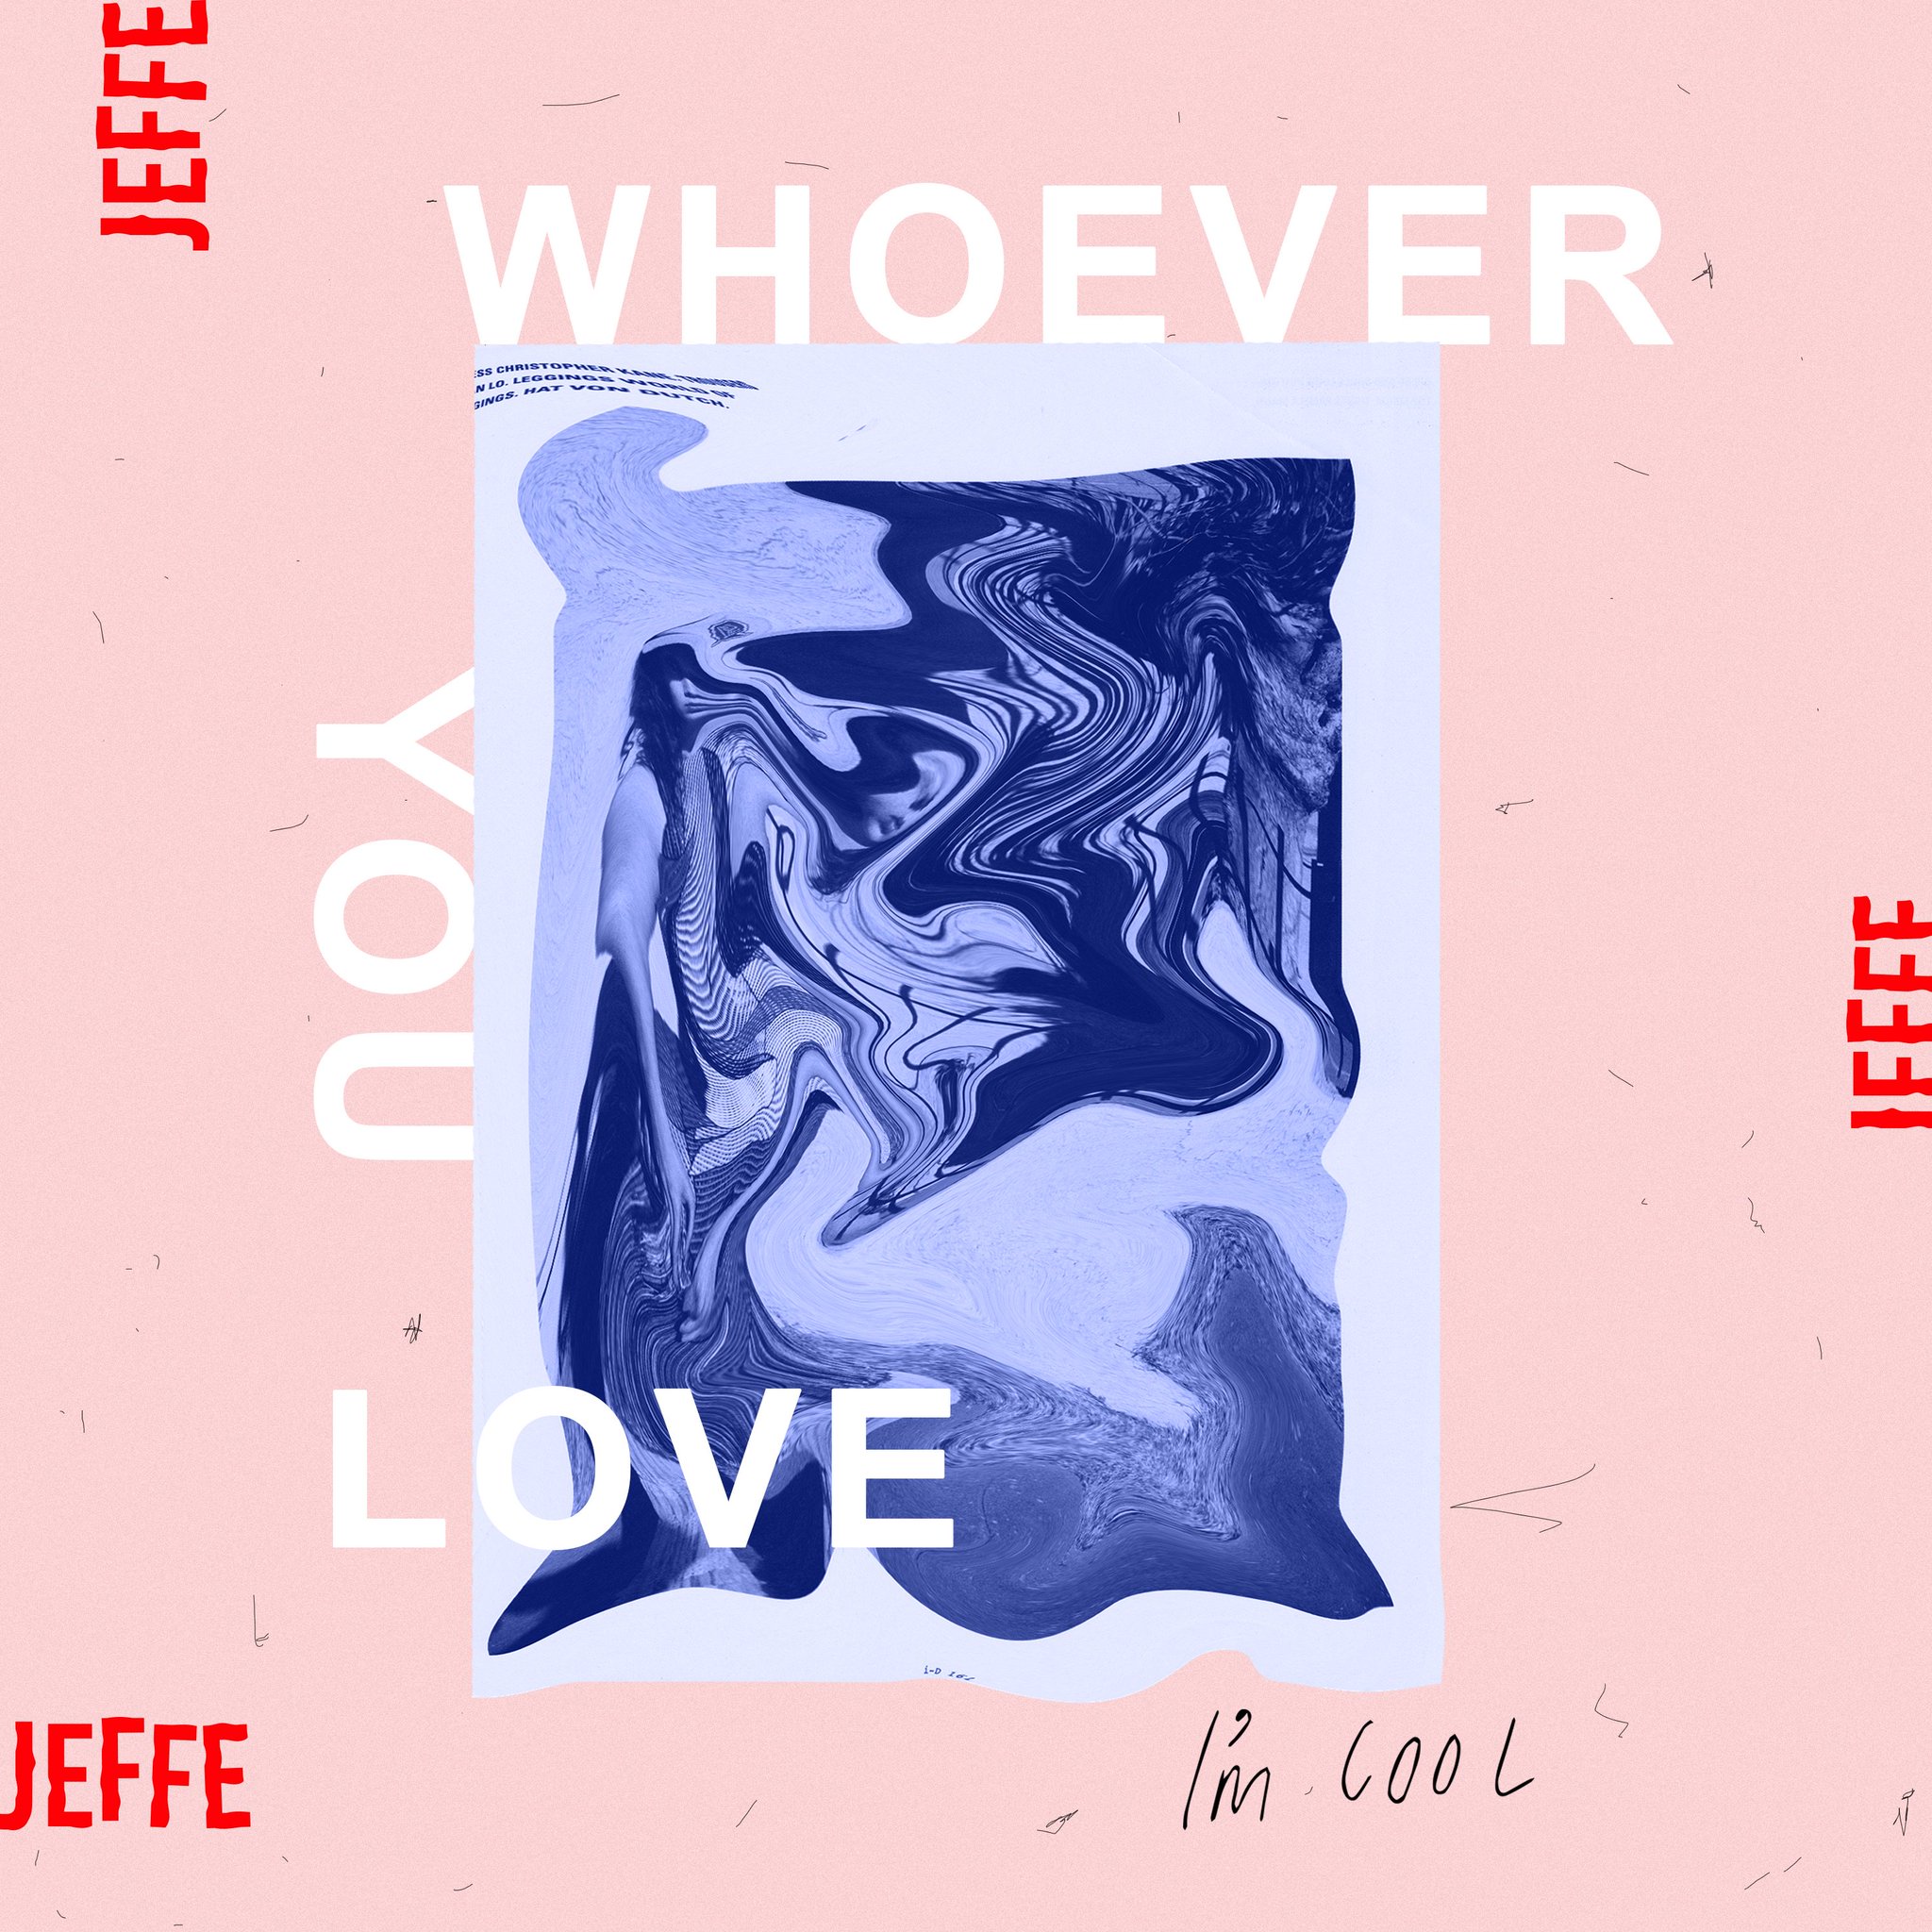 LISTEN: Whoever You Love, I’m Cool by Jeffe